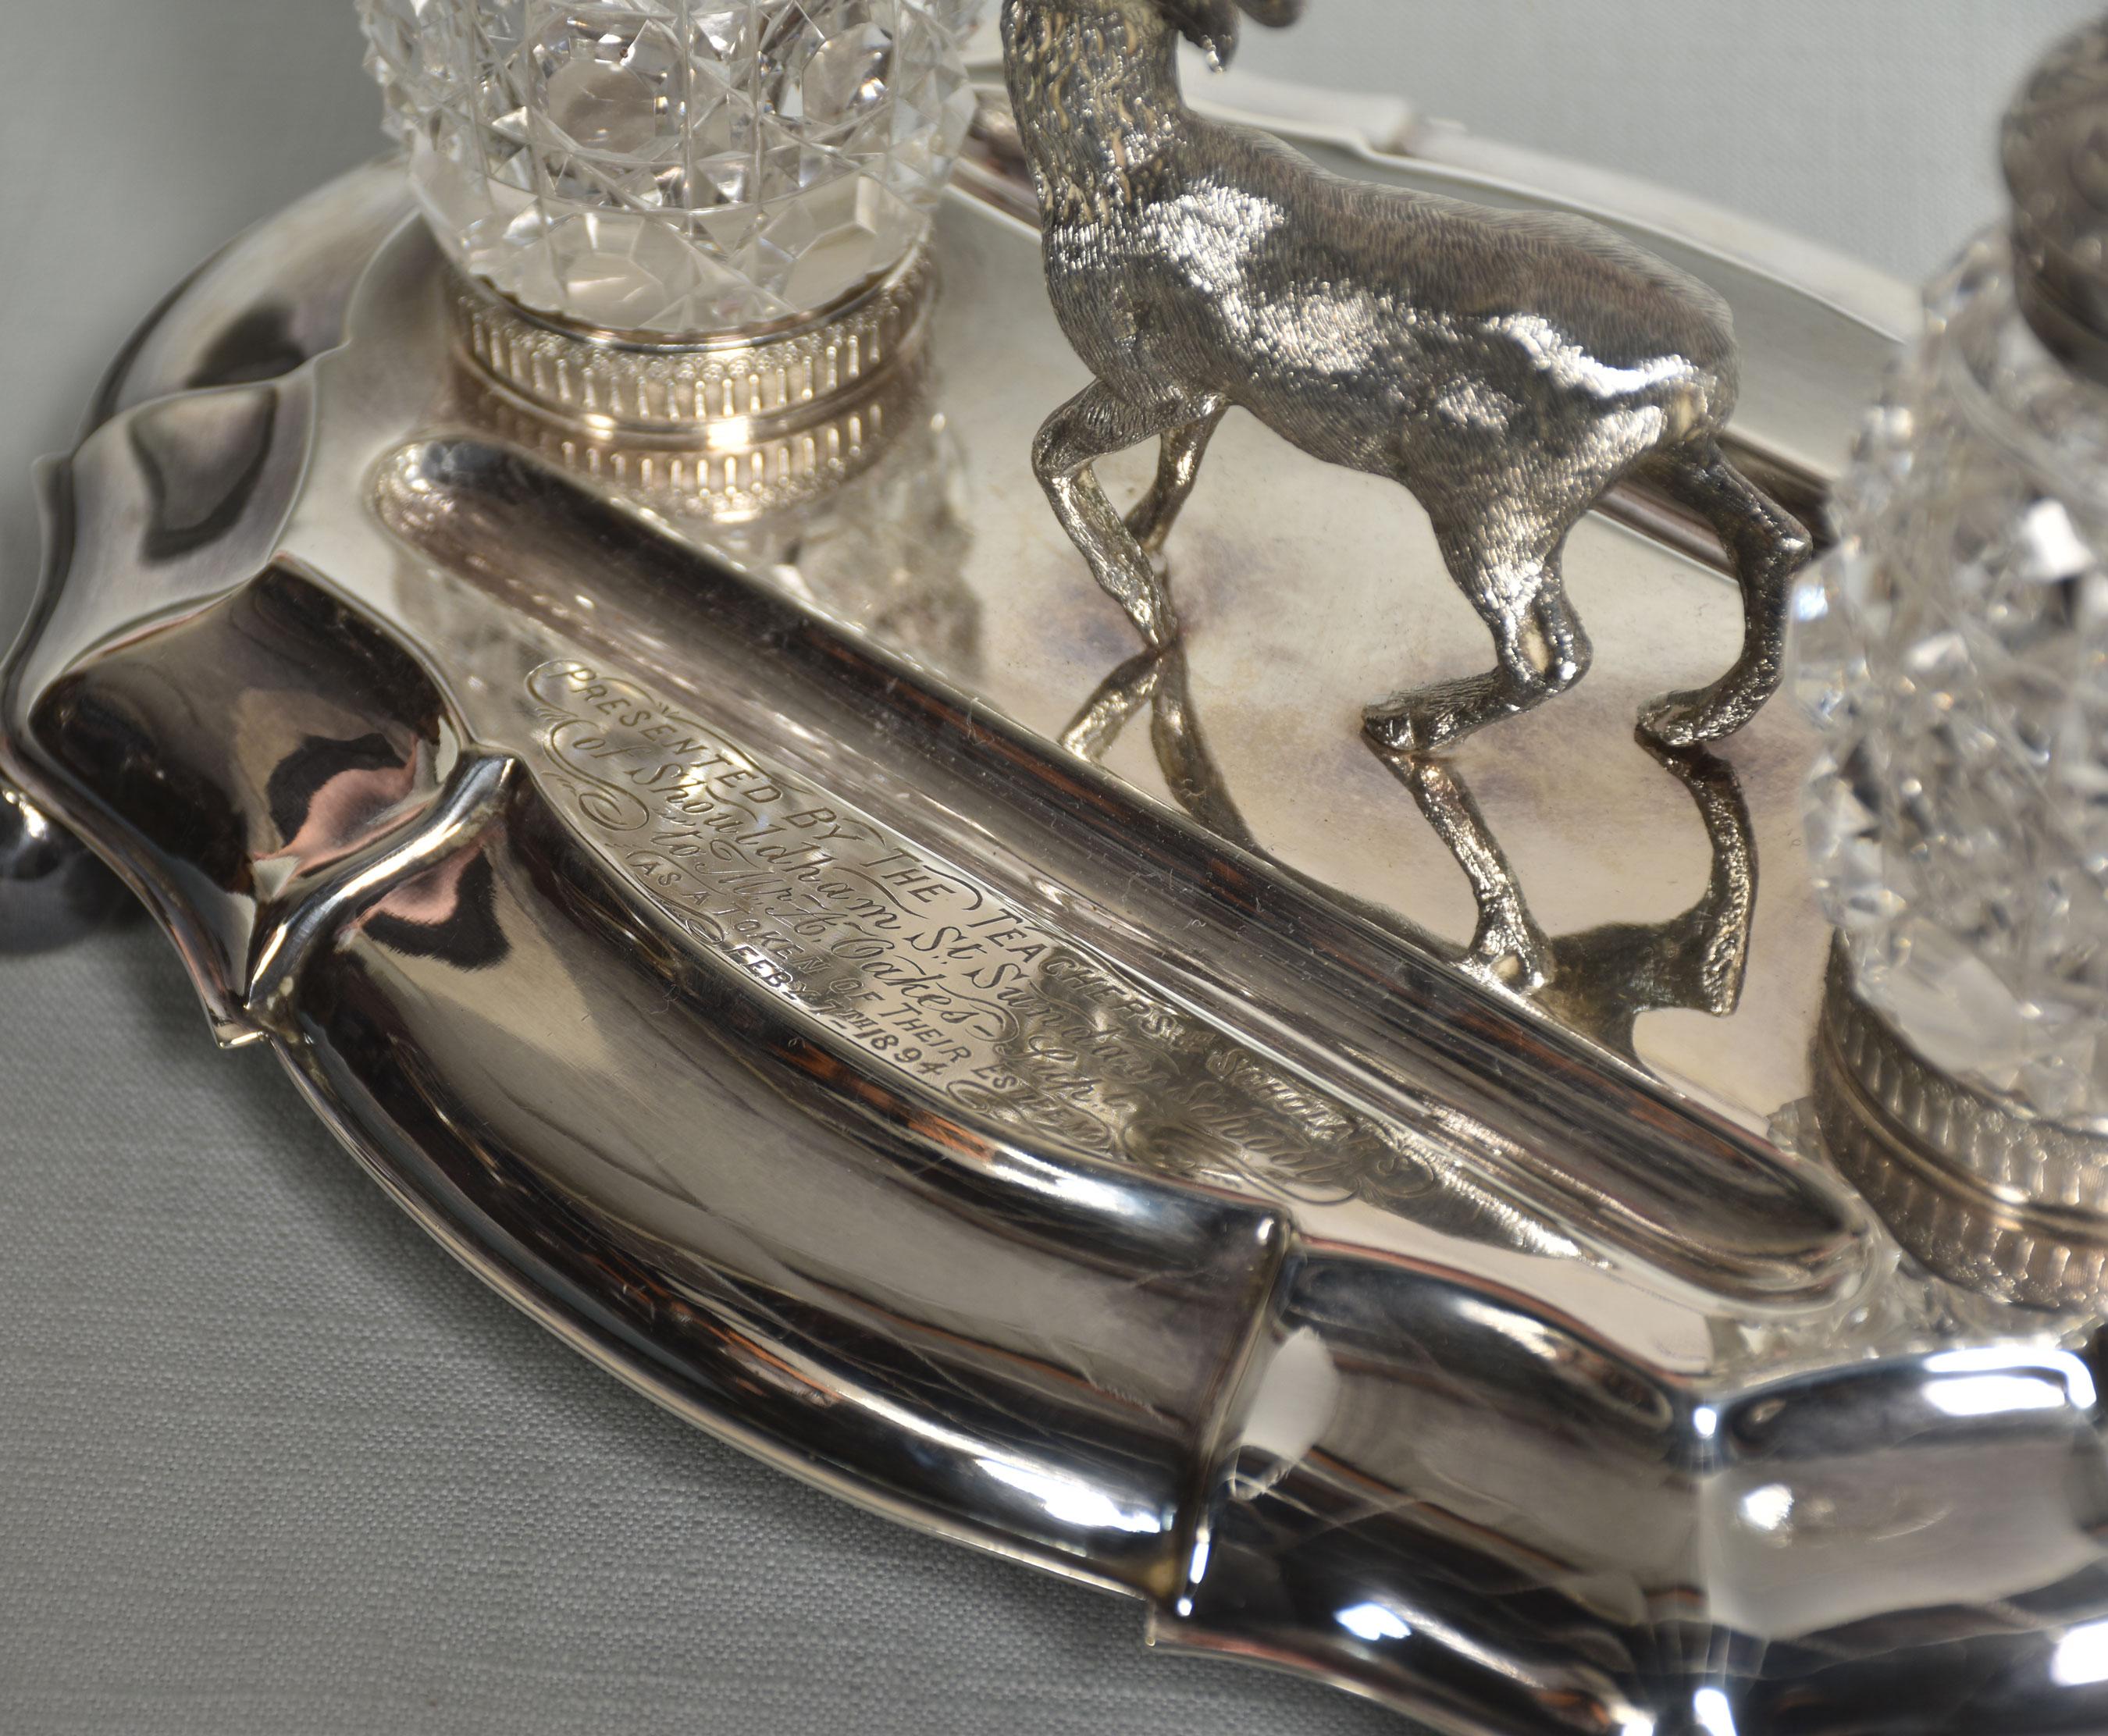 19th-century silver plated oval desk stand with a central study of a standing stag flanked by twin cut glass bottles with plated foliate decorated cover. All raised on four ball feet. Stamped Wilson & Co, Sheffield.
Dimensions
Height 5.5